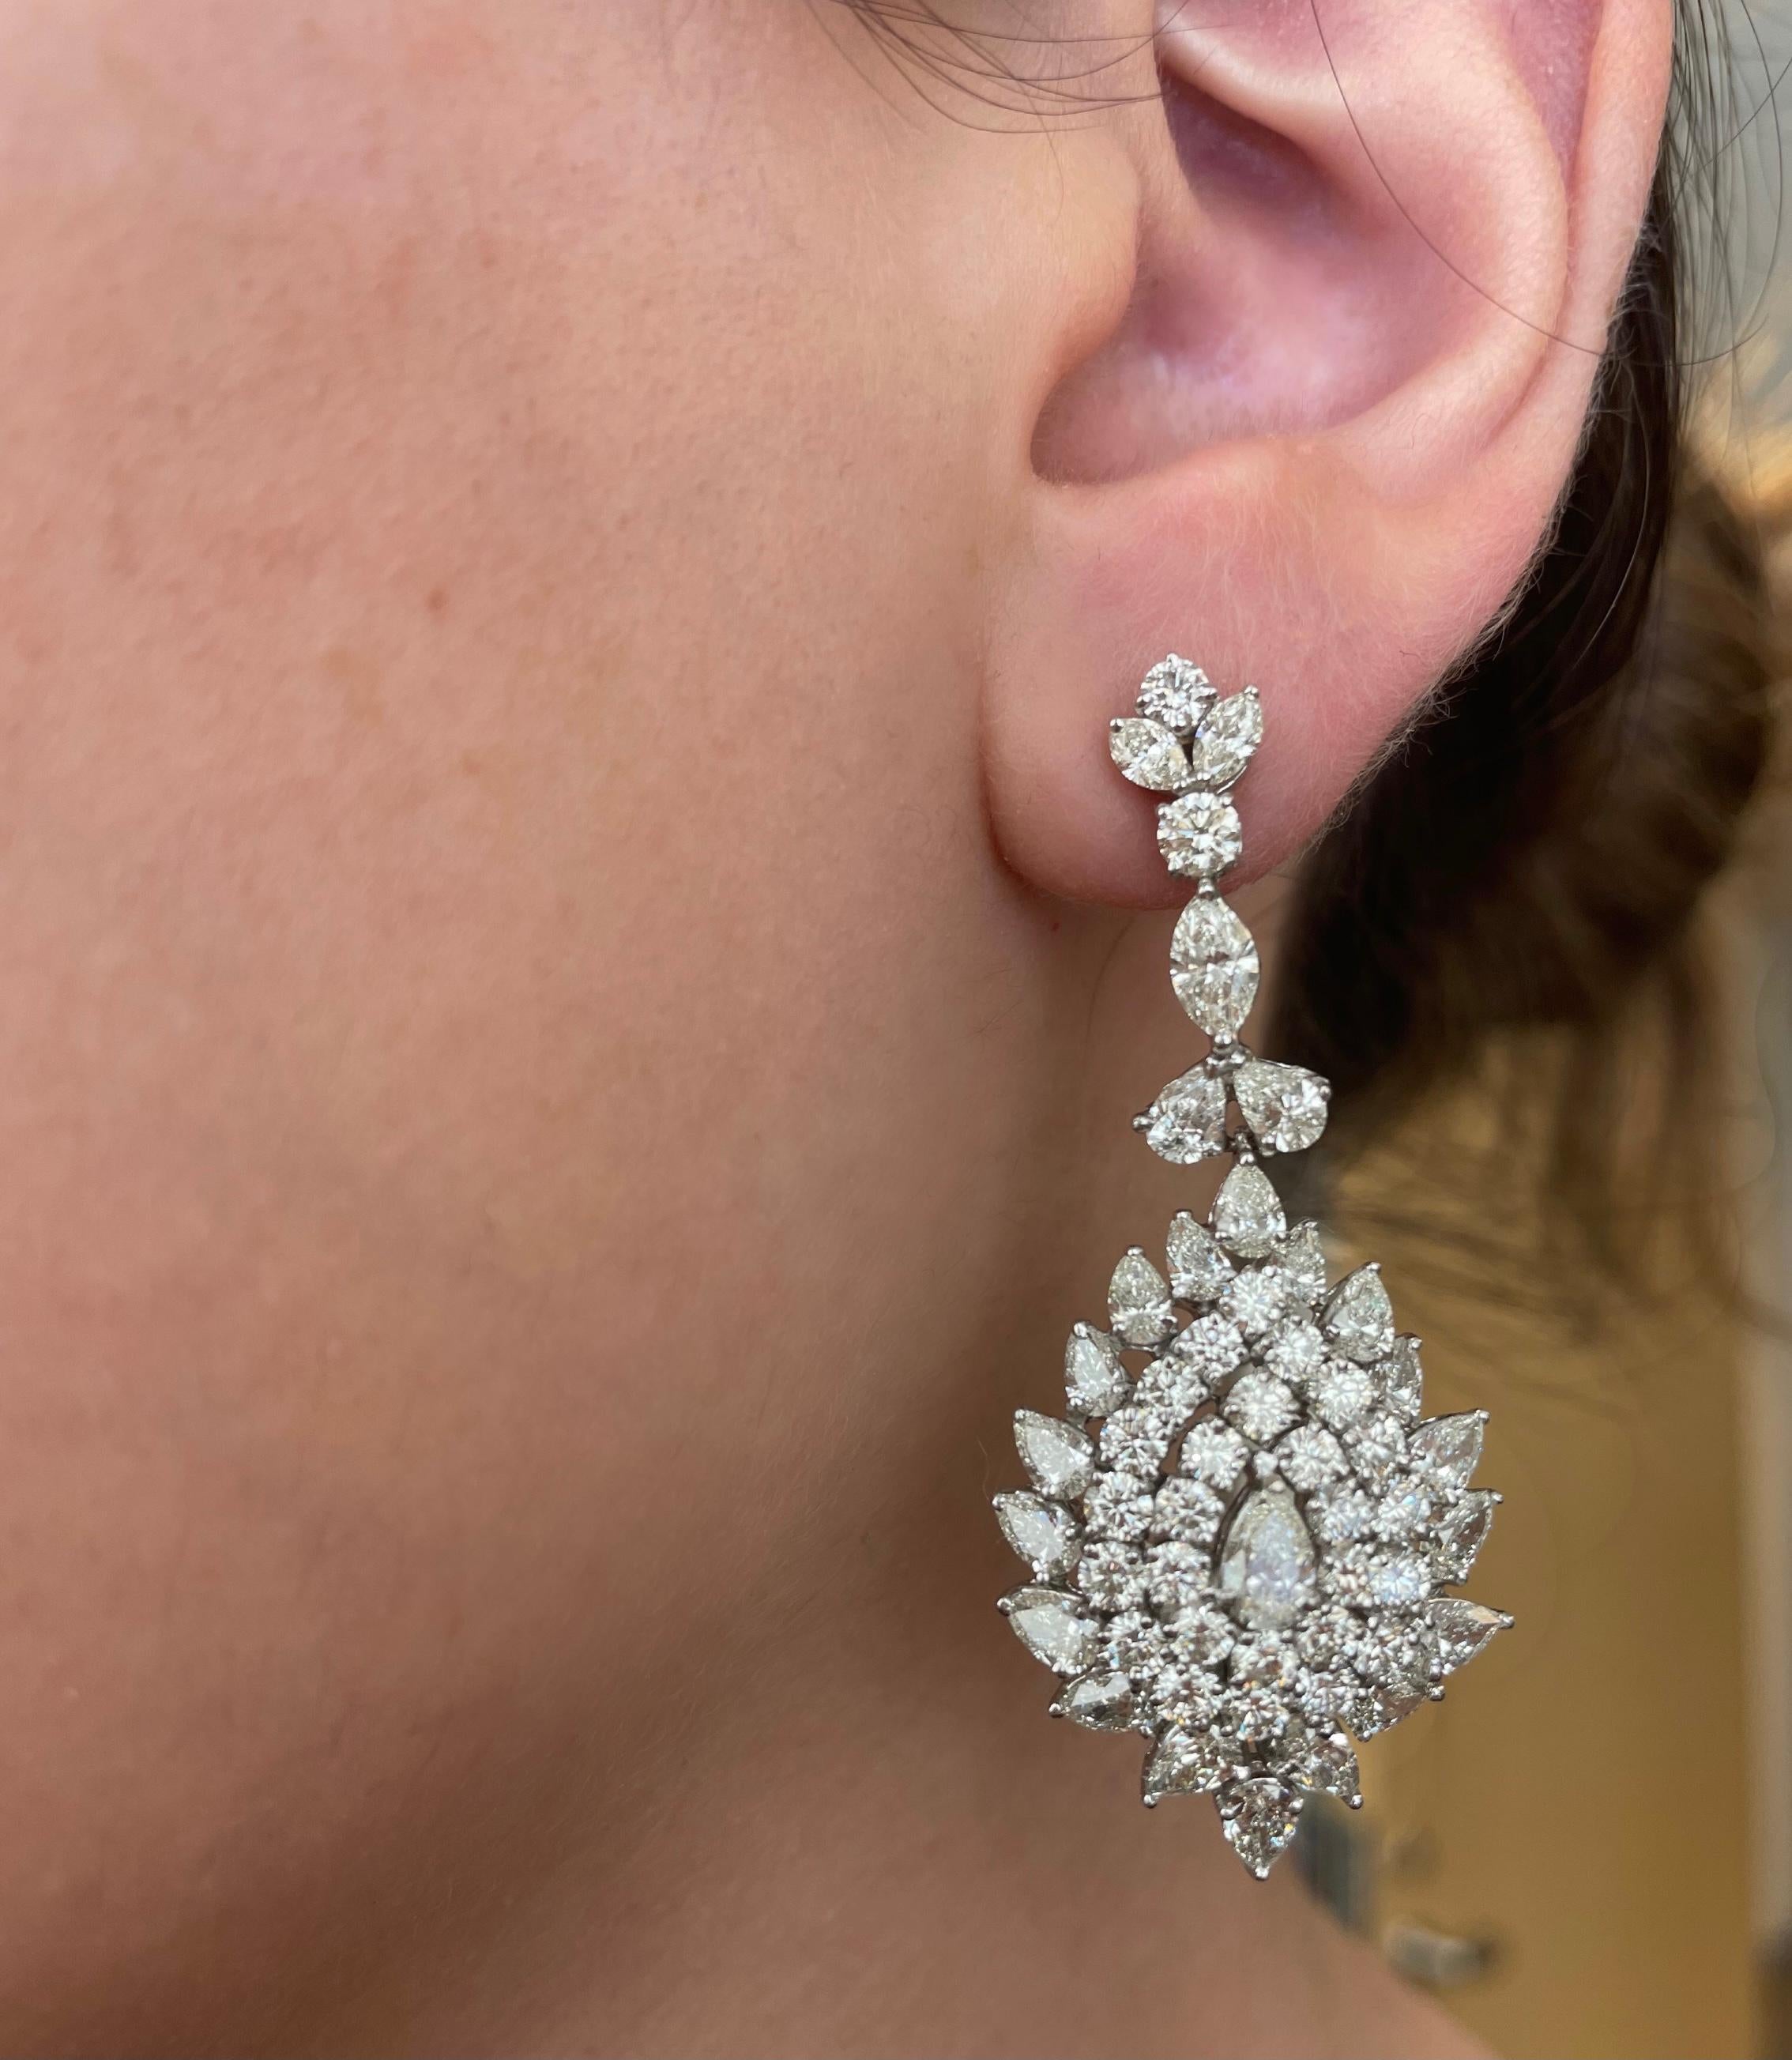 Stunning vintage chandelier high jewelry earrings.
Approximately 15.75 carats of pear, marquise and round brilliant diamonds. Approximately H/I color grade and VS2/SI1 clarity grade. 18-karat white gold, 18.02 grams. 
Accommodated with an up-to-date